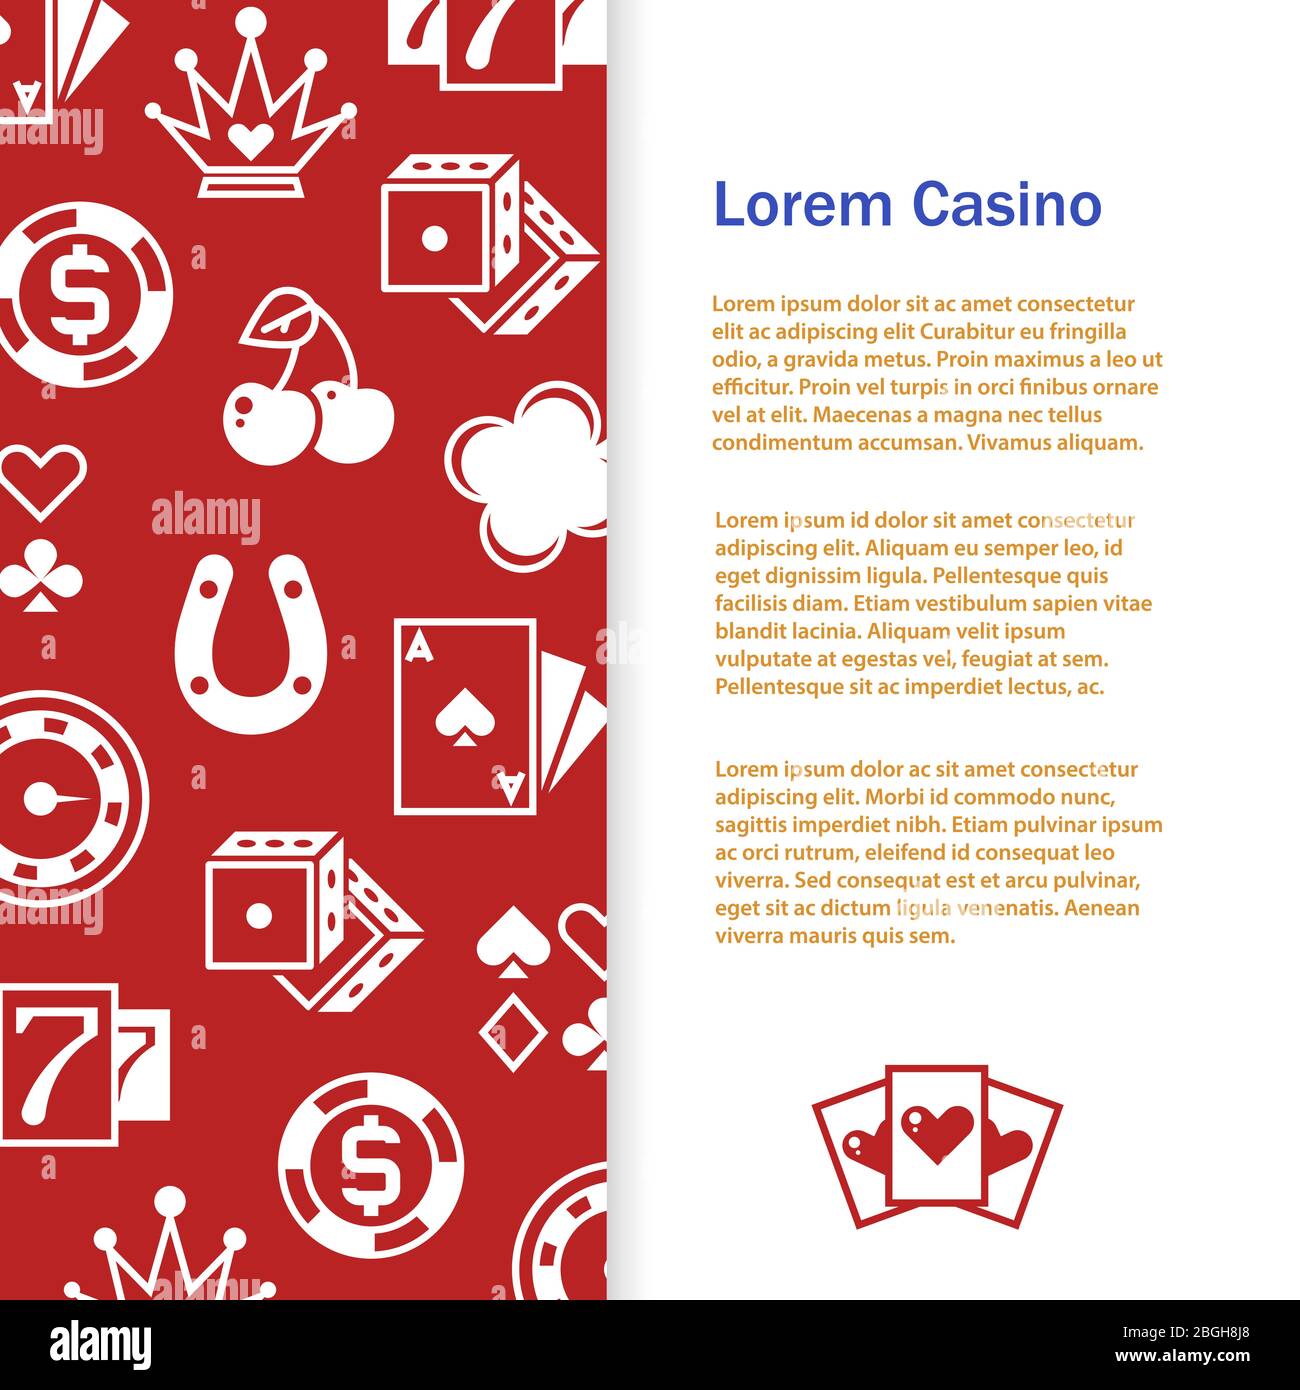 Casino poker banner or poster template design with text. Vector illustration Stock Vector